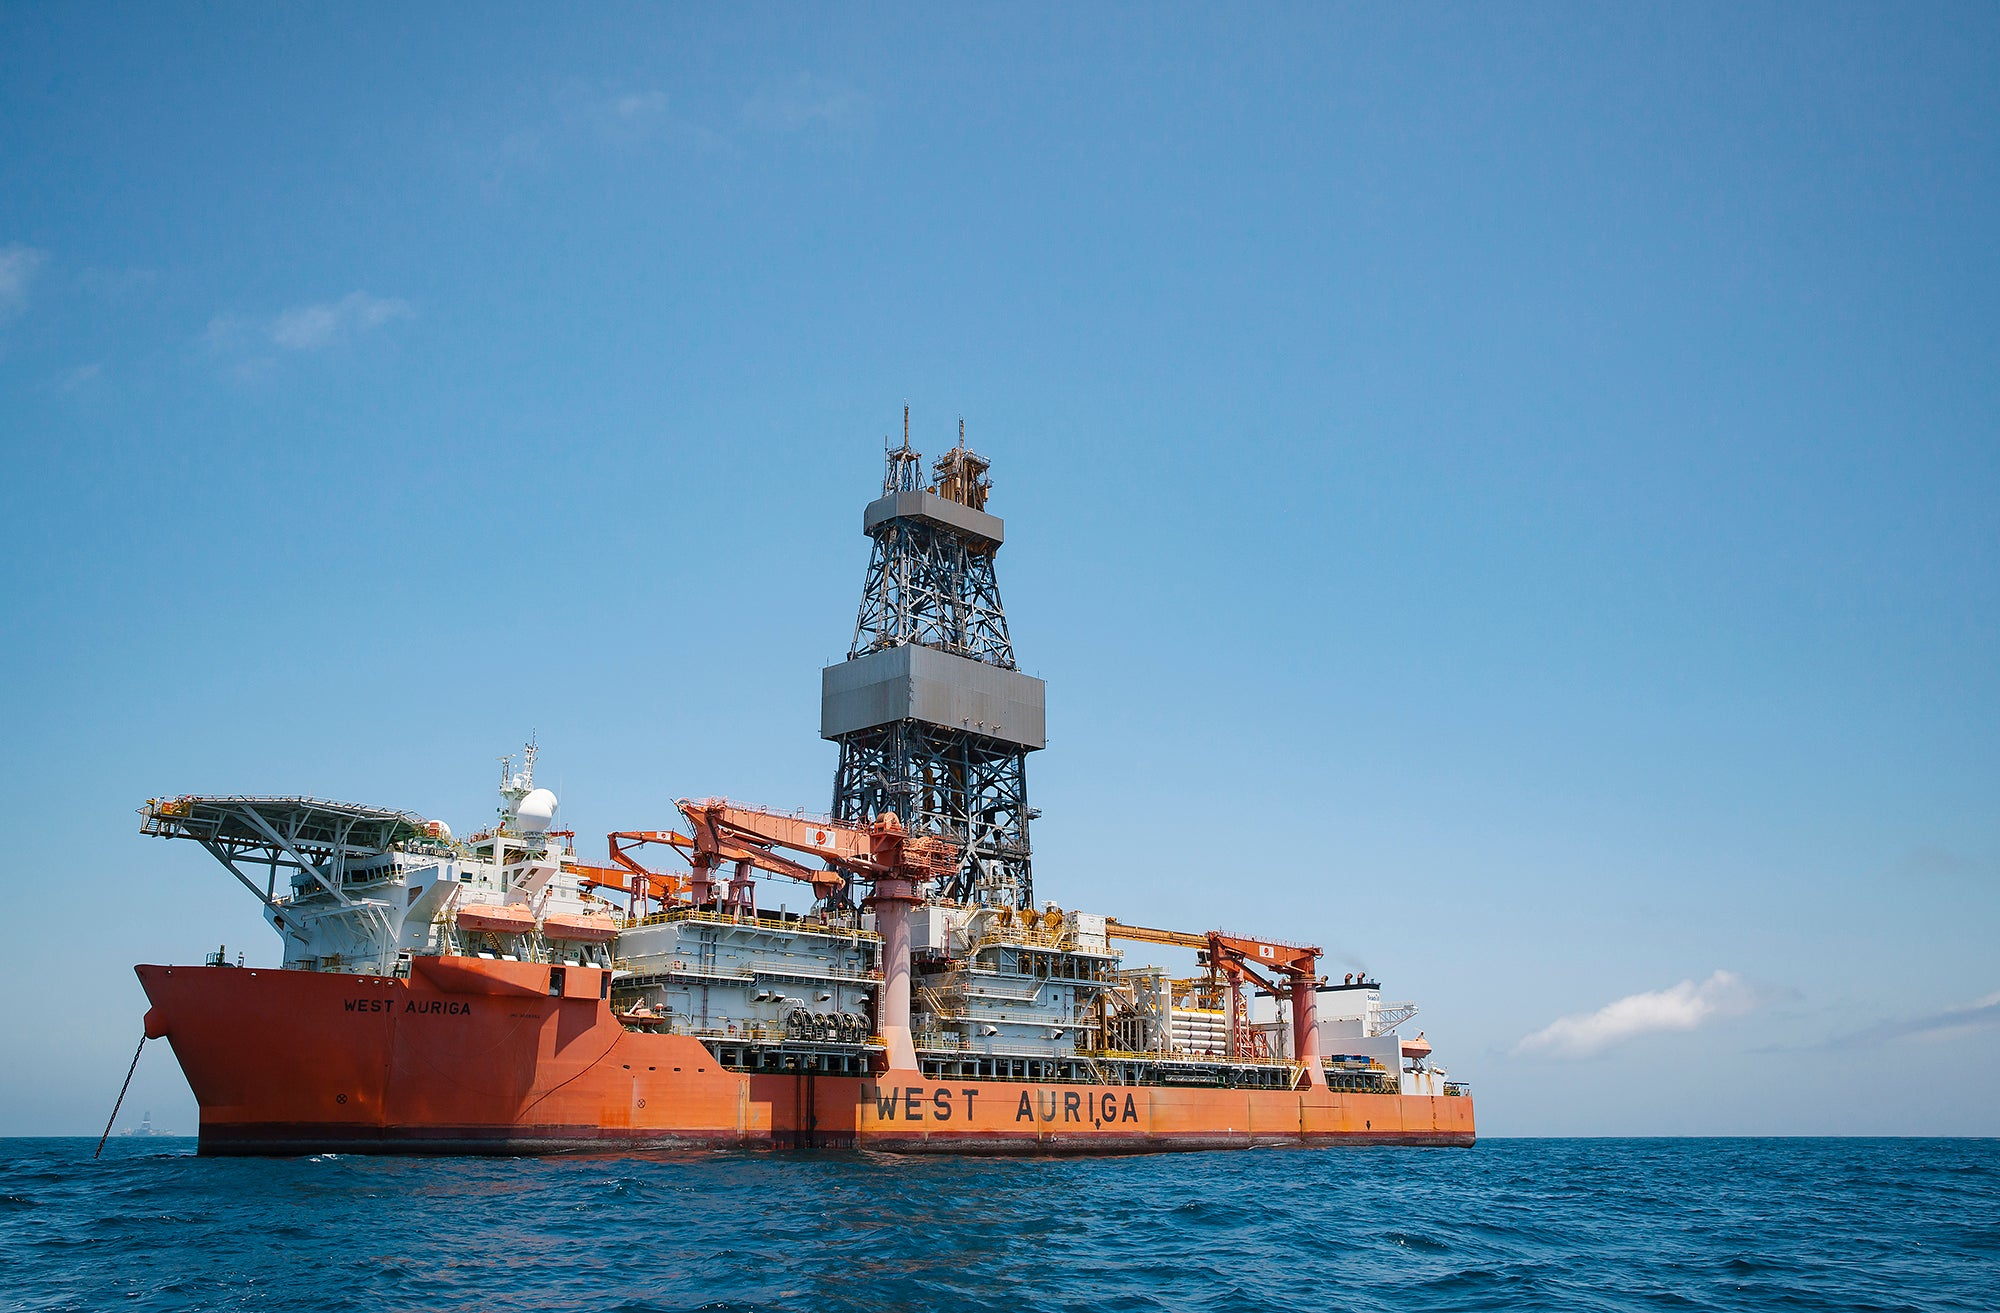 An ultra-deepwater drillship anchored in the Gulf of Mexico.